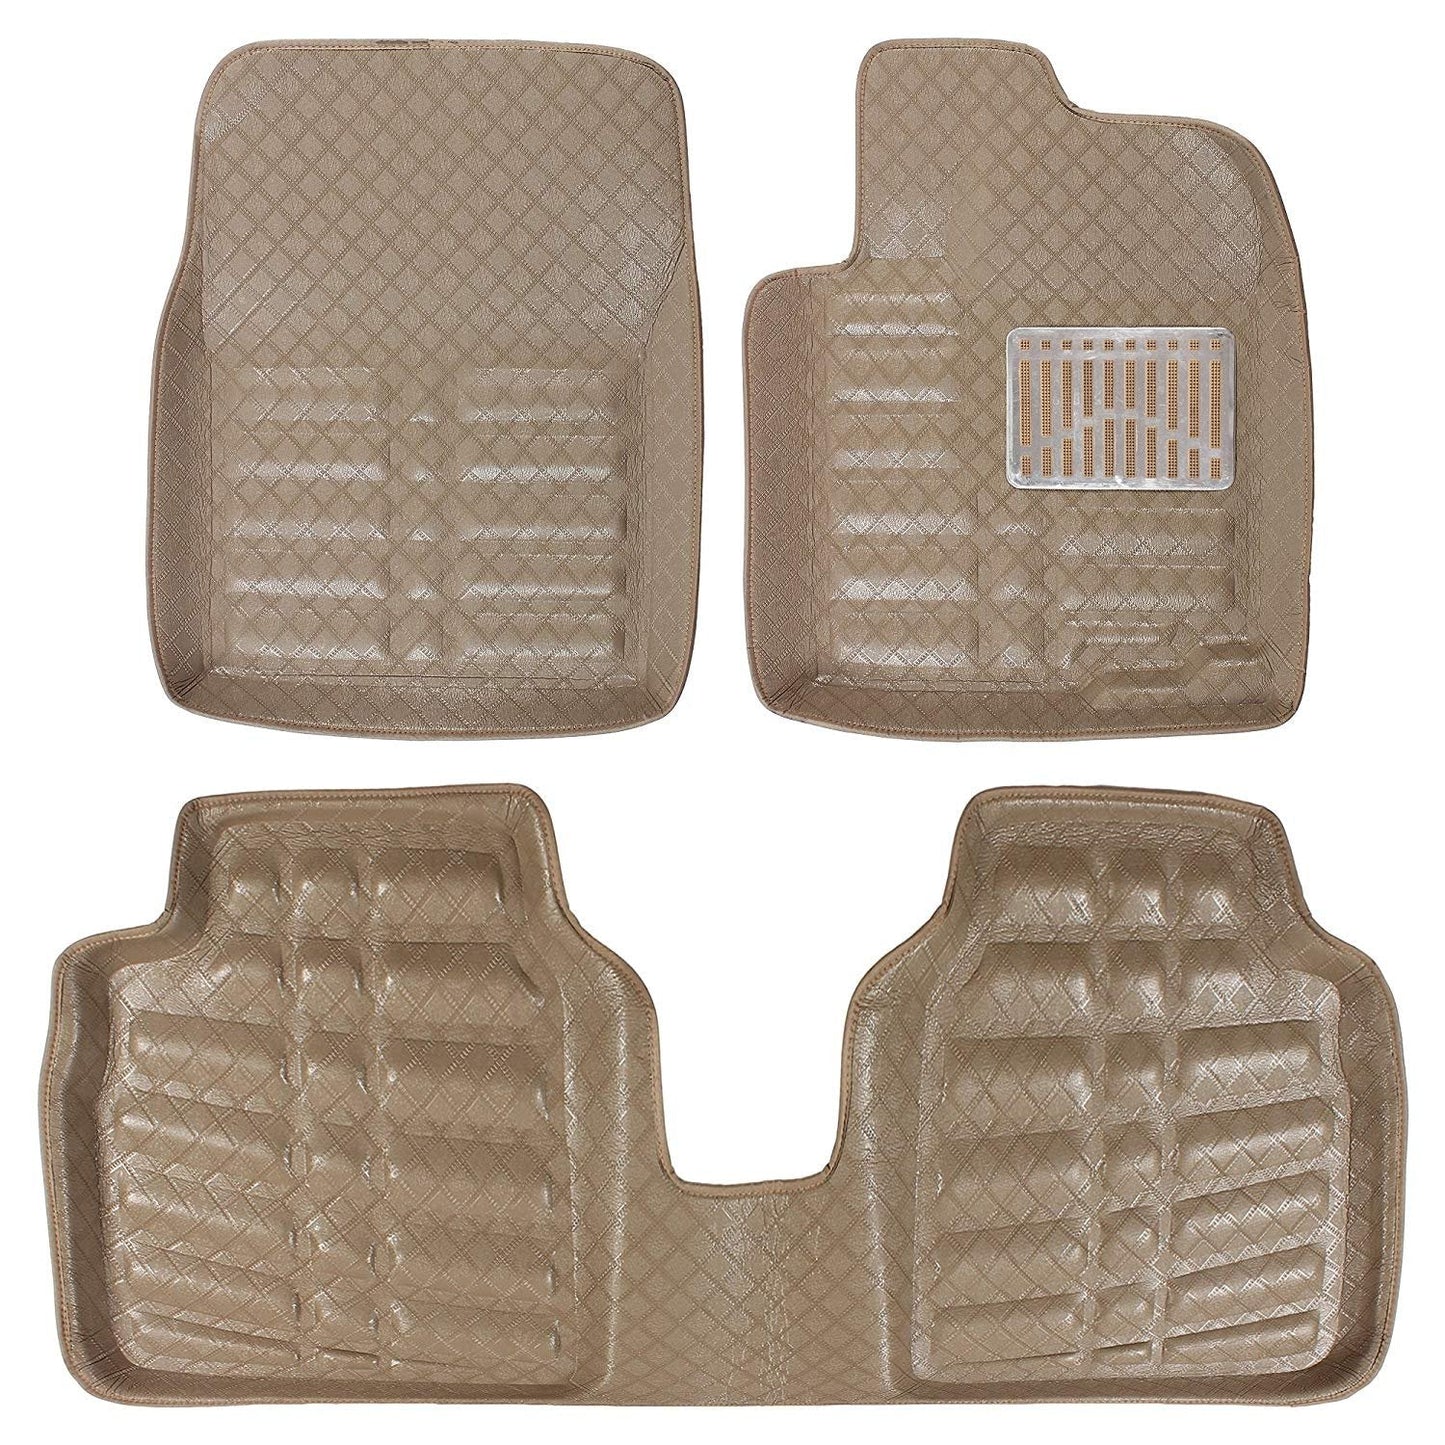 Oshotto 4D Artificial Leather Car Floor Mats For Volkswagen Vento - Set of 3 (2 pcs Front & one Long Single Rear pc) - Beige